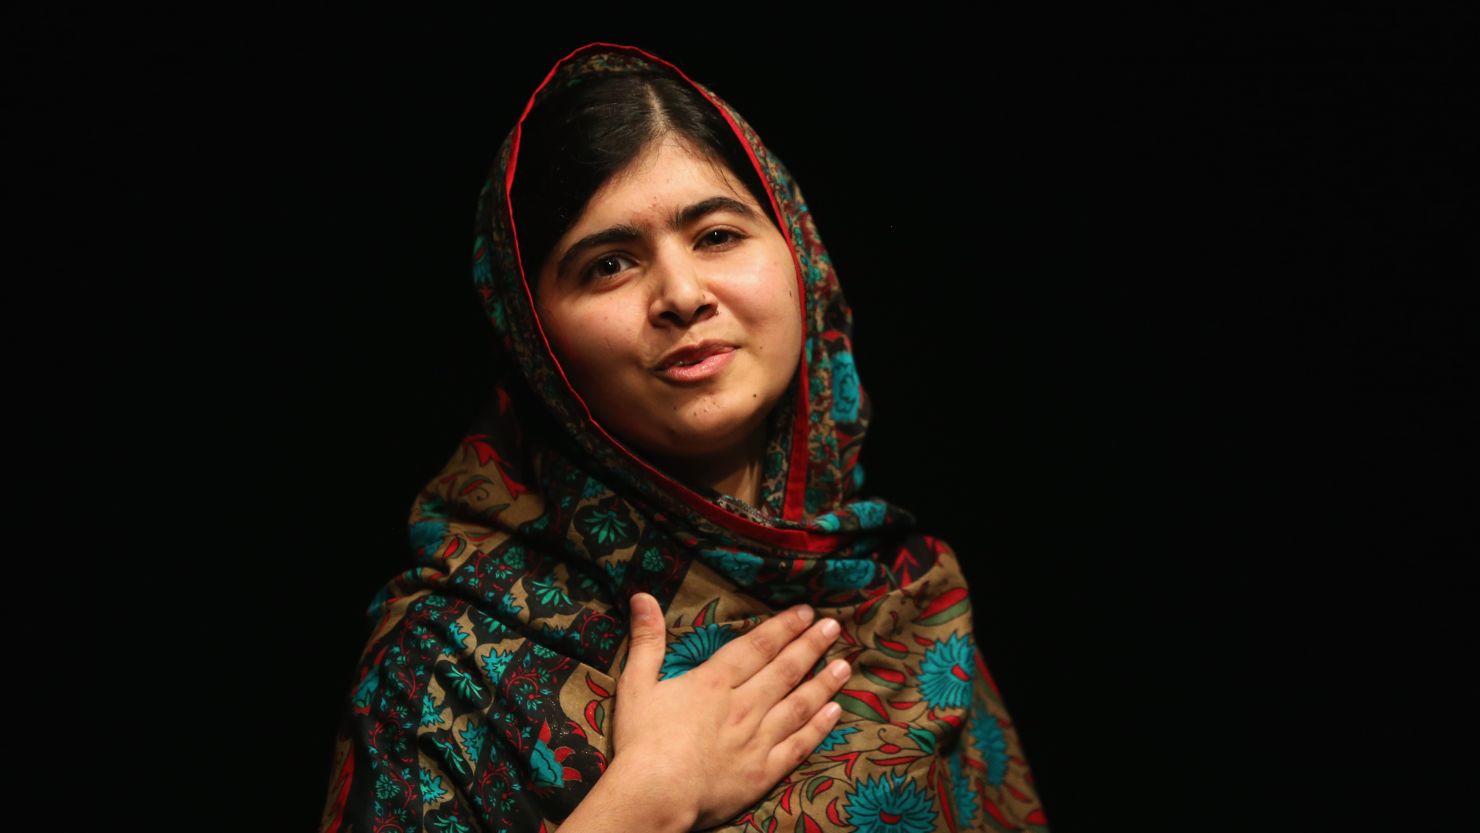 Malala Yousafzai acknowledges the crowd at a press conference at the Library of Birmingham after being announced as a recipient of the Nobel Peace Prize